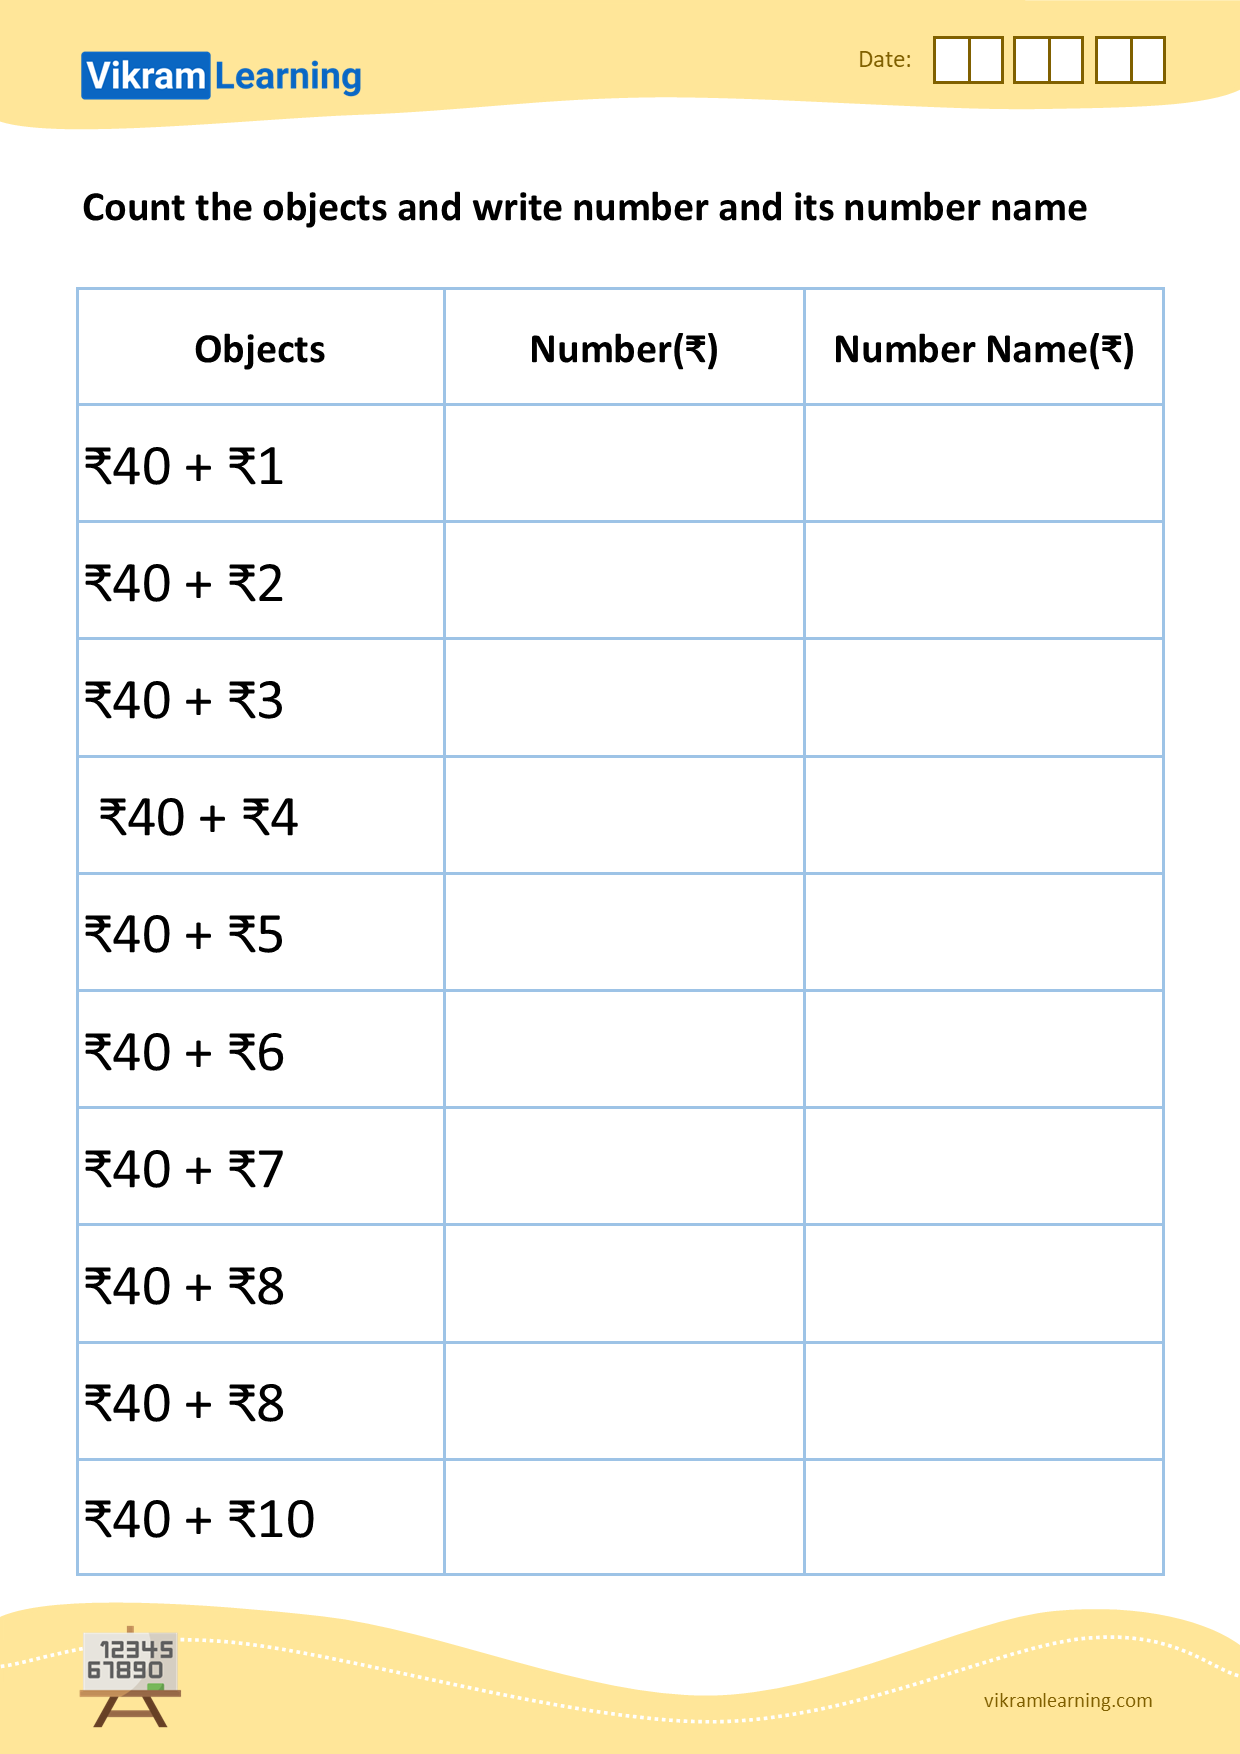 Download count the objects and write number and its number name - 2 worksheets